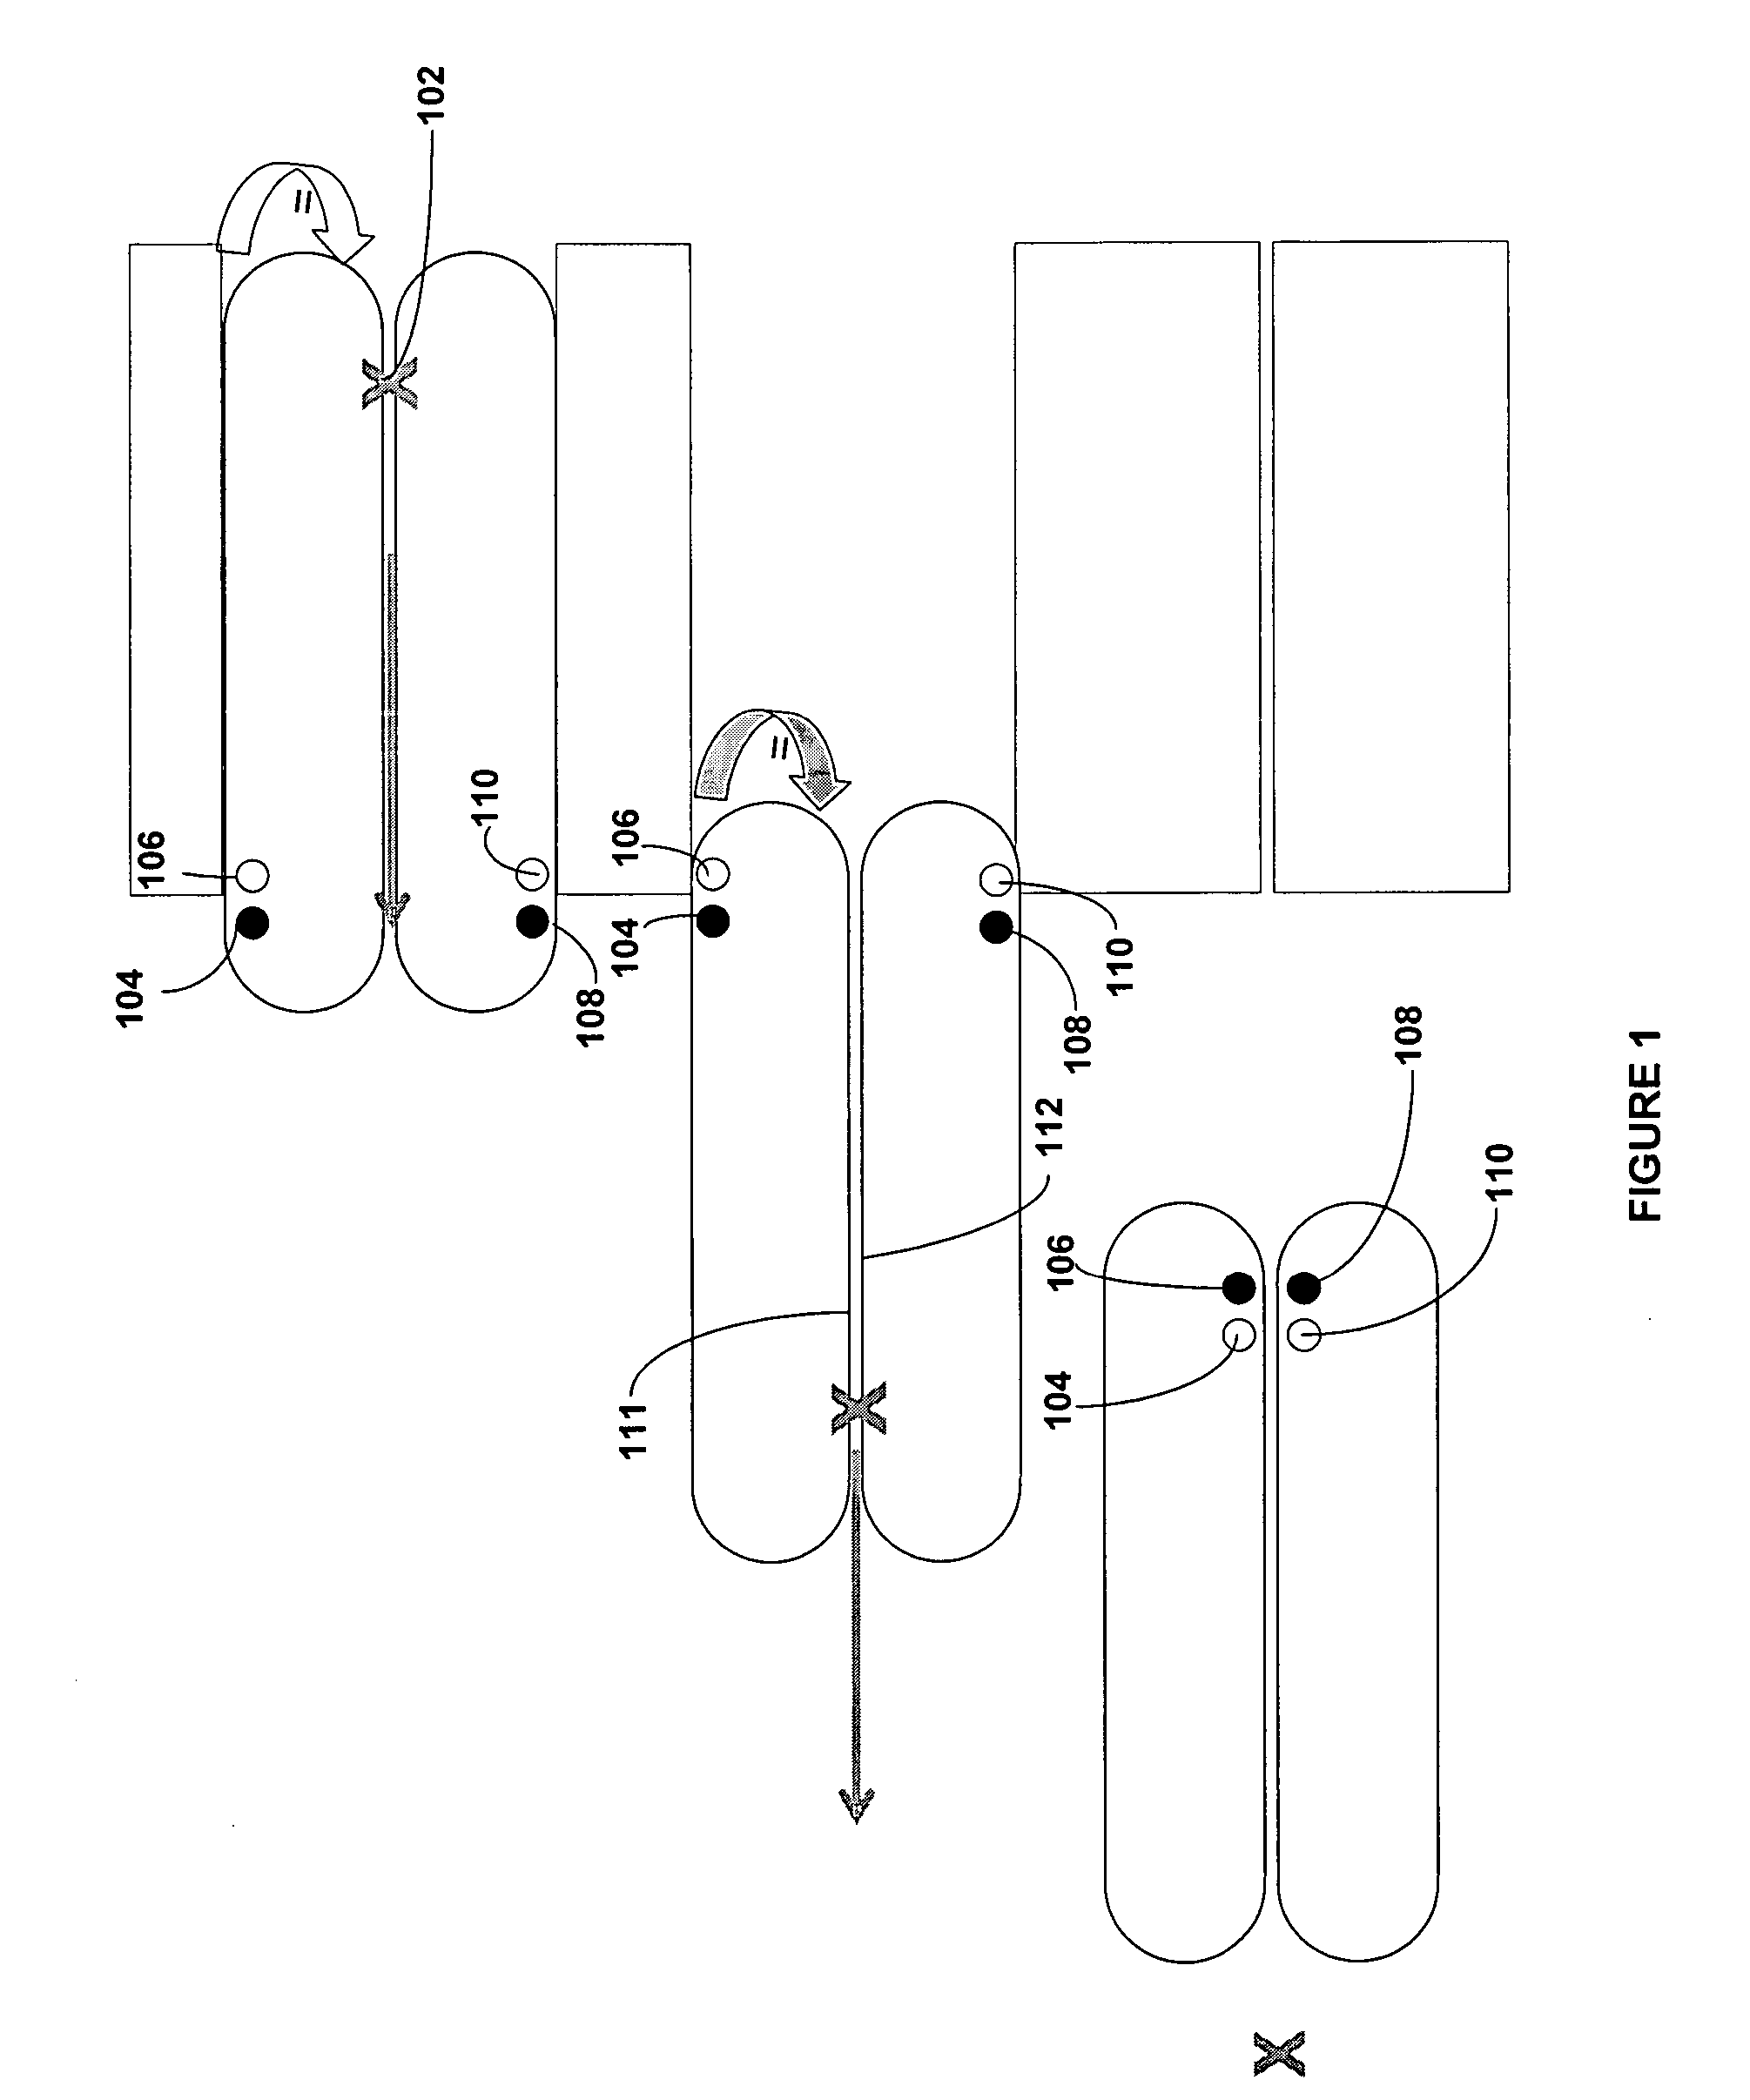 Method and device for extracting objects from the body